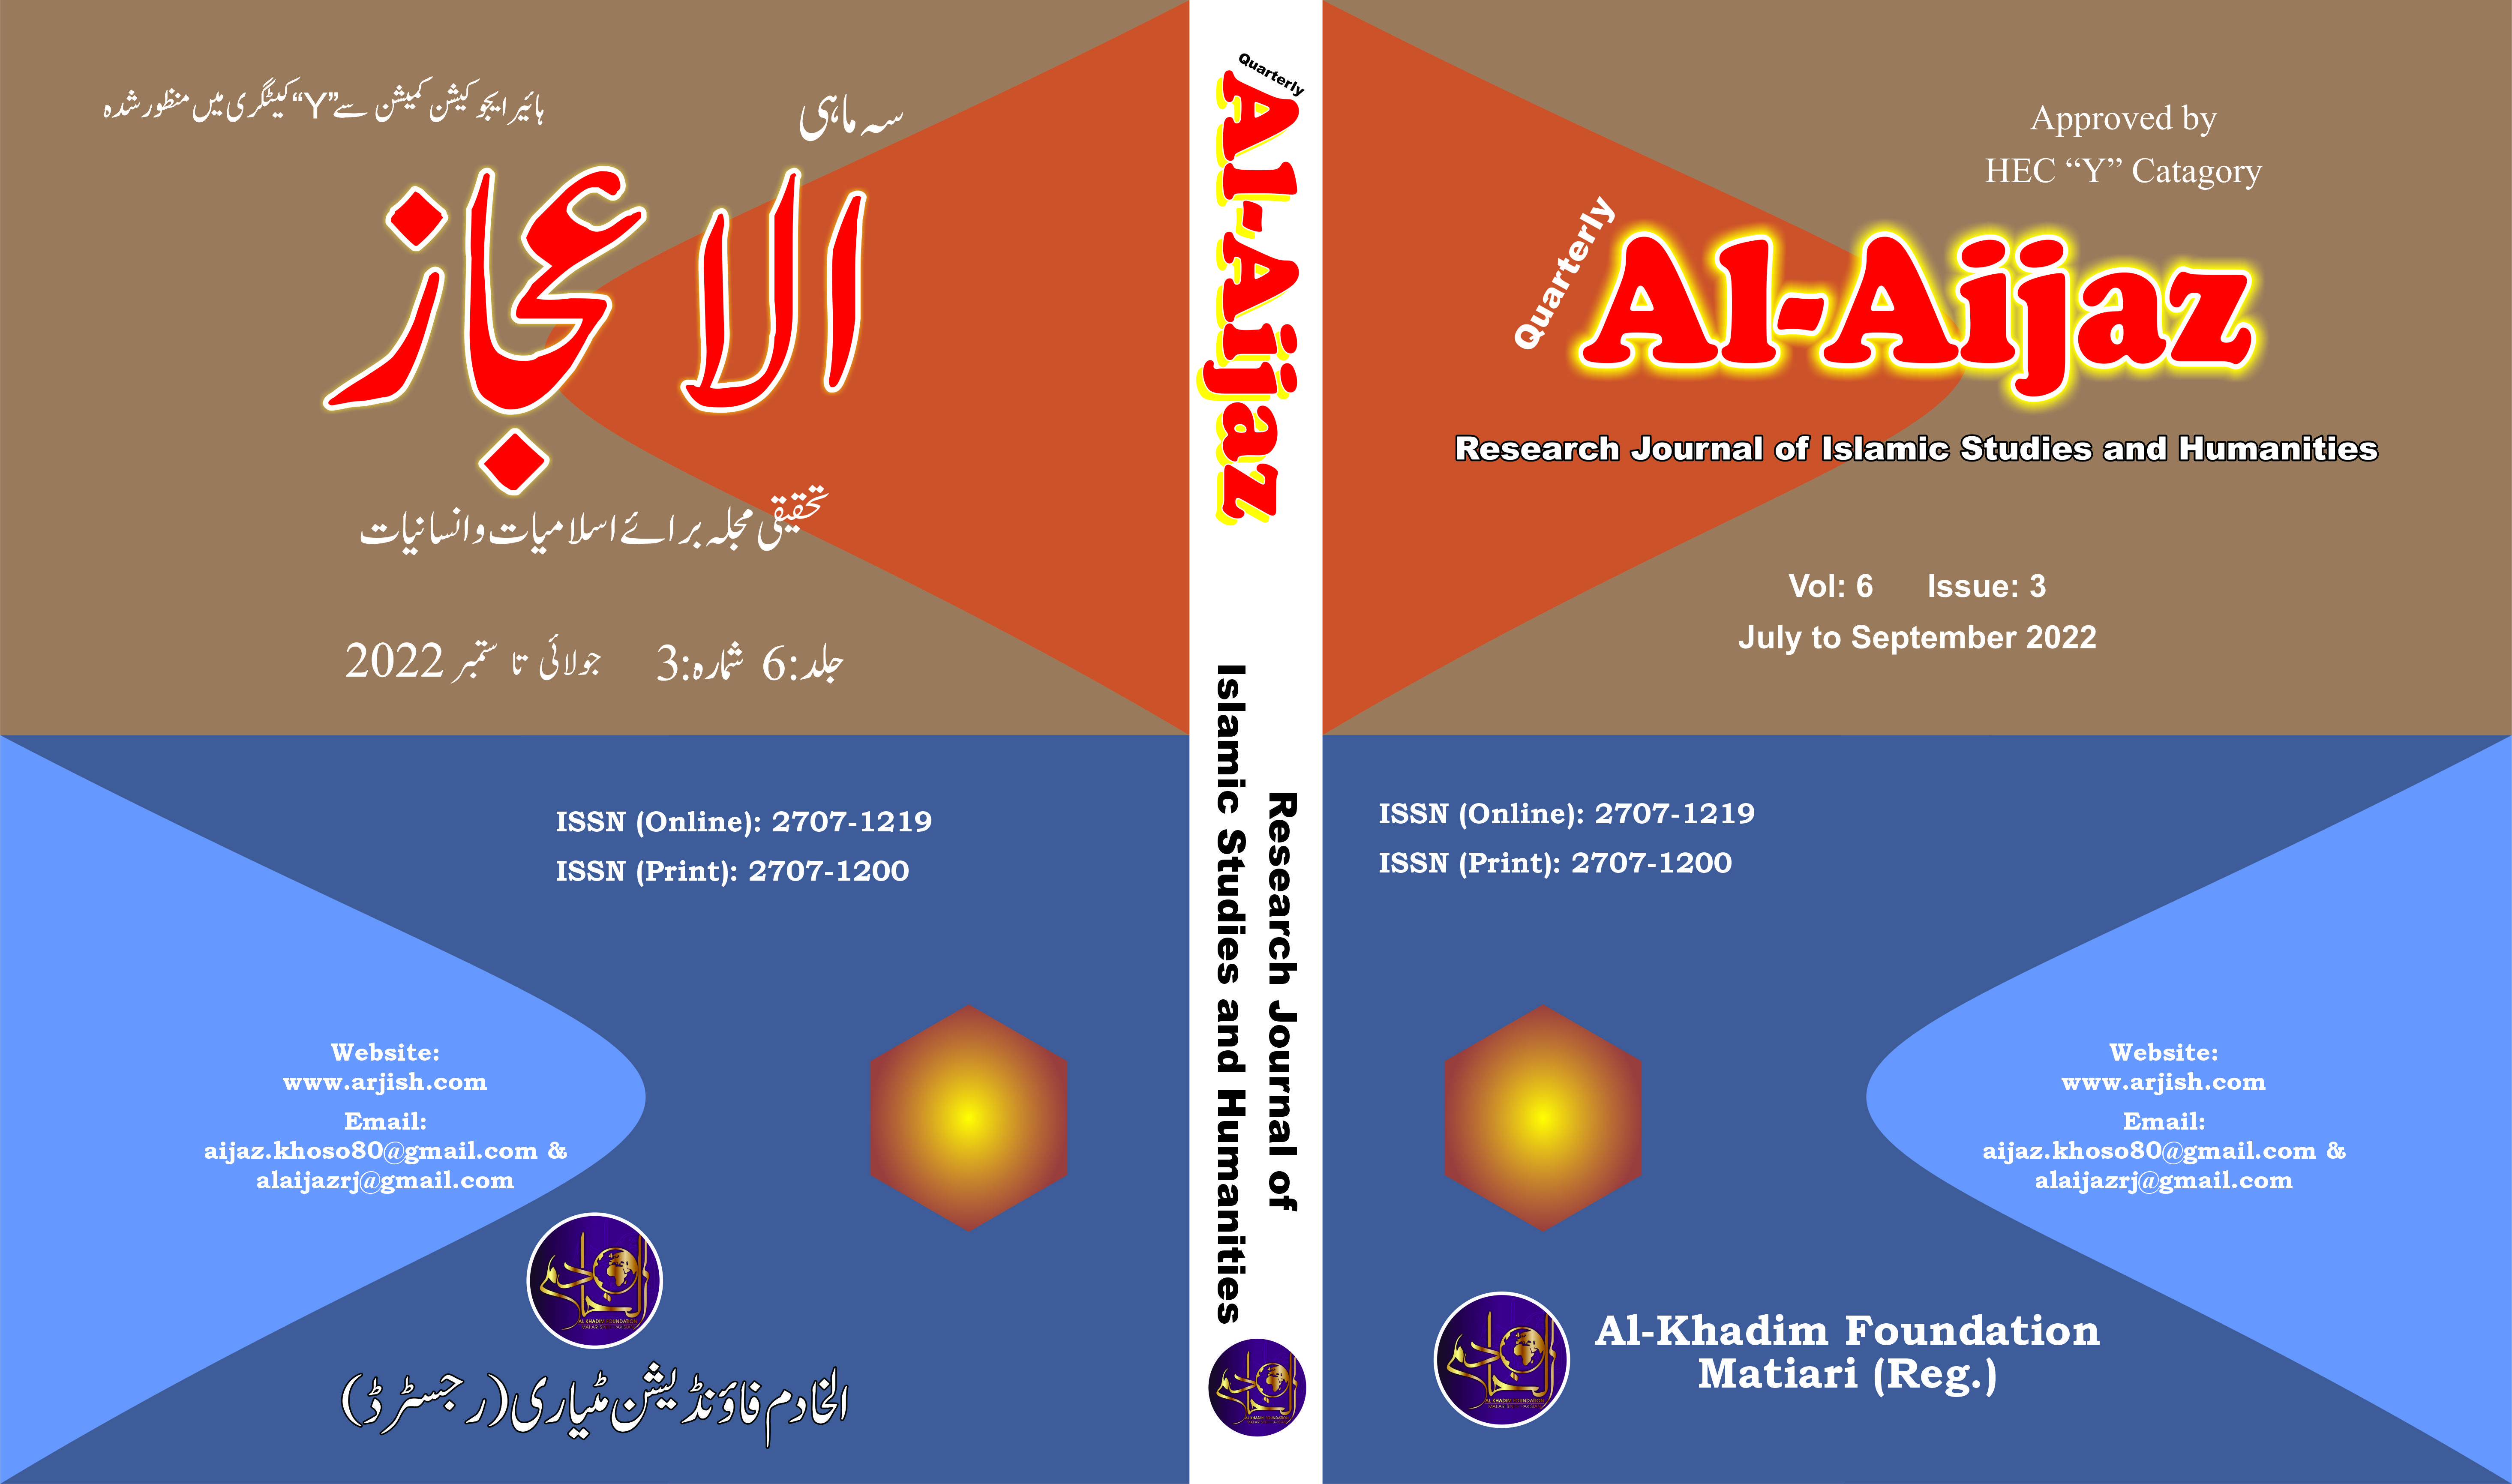 					View Vol. 6 No. 3 (2022): Al-Aijaz Research Journal of Islamic Studies & Humanities (July to September 2022)
				